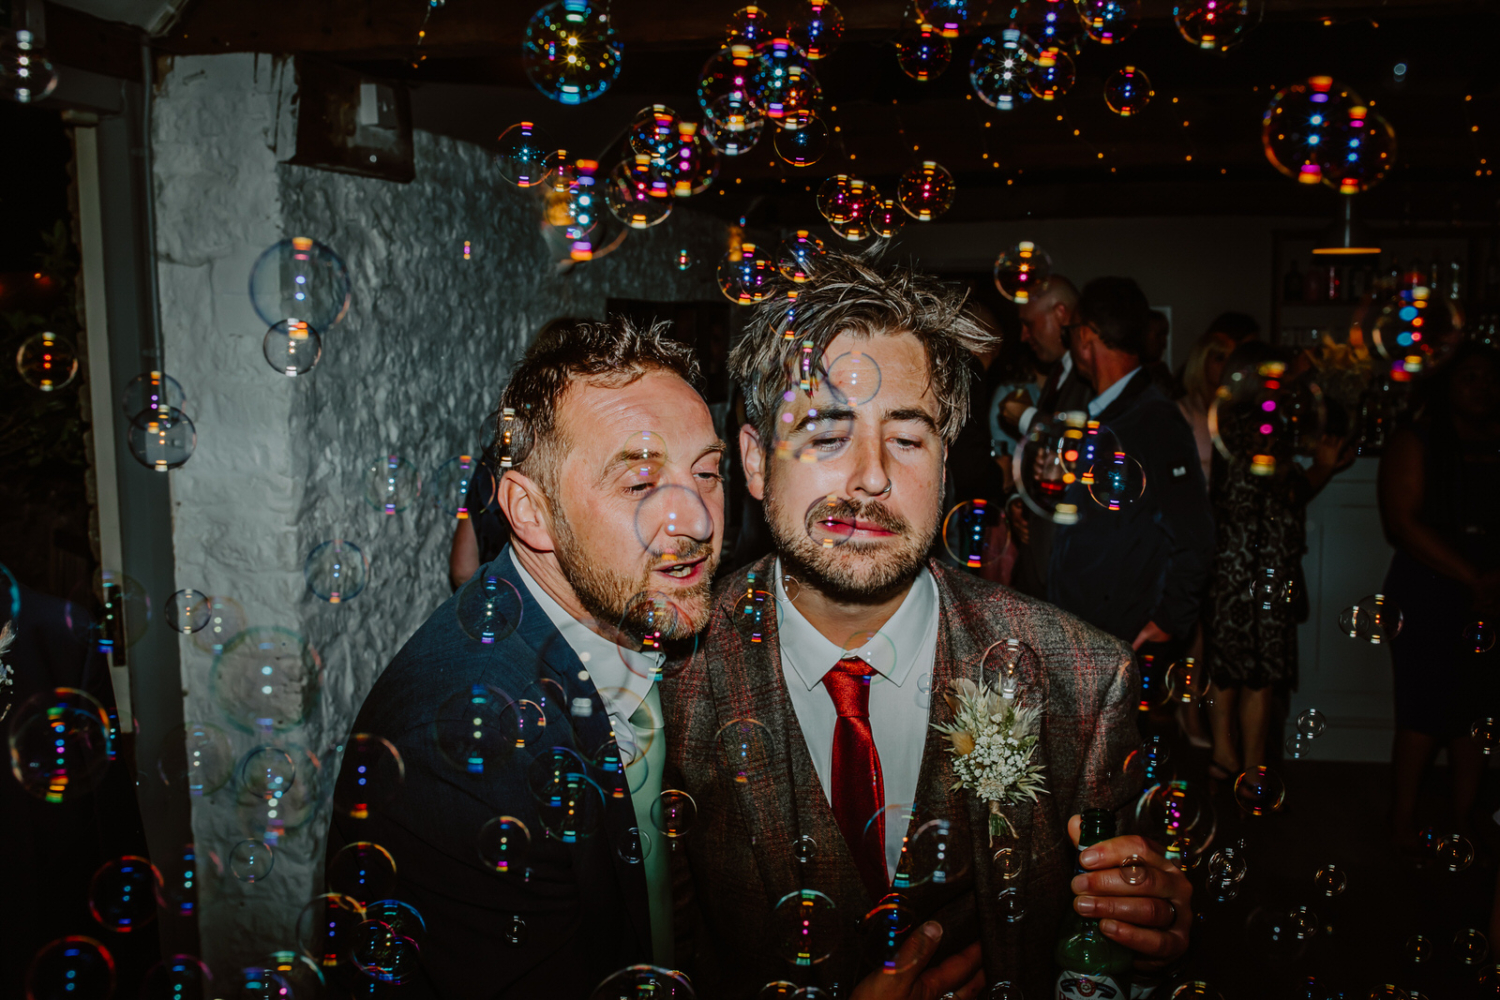 The groom and his friend enjoys the bubbles on the dance floor